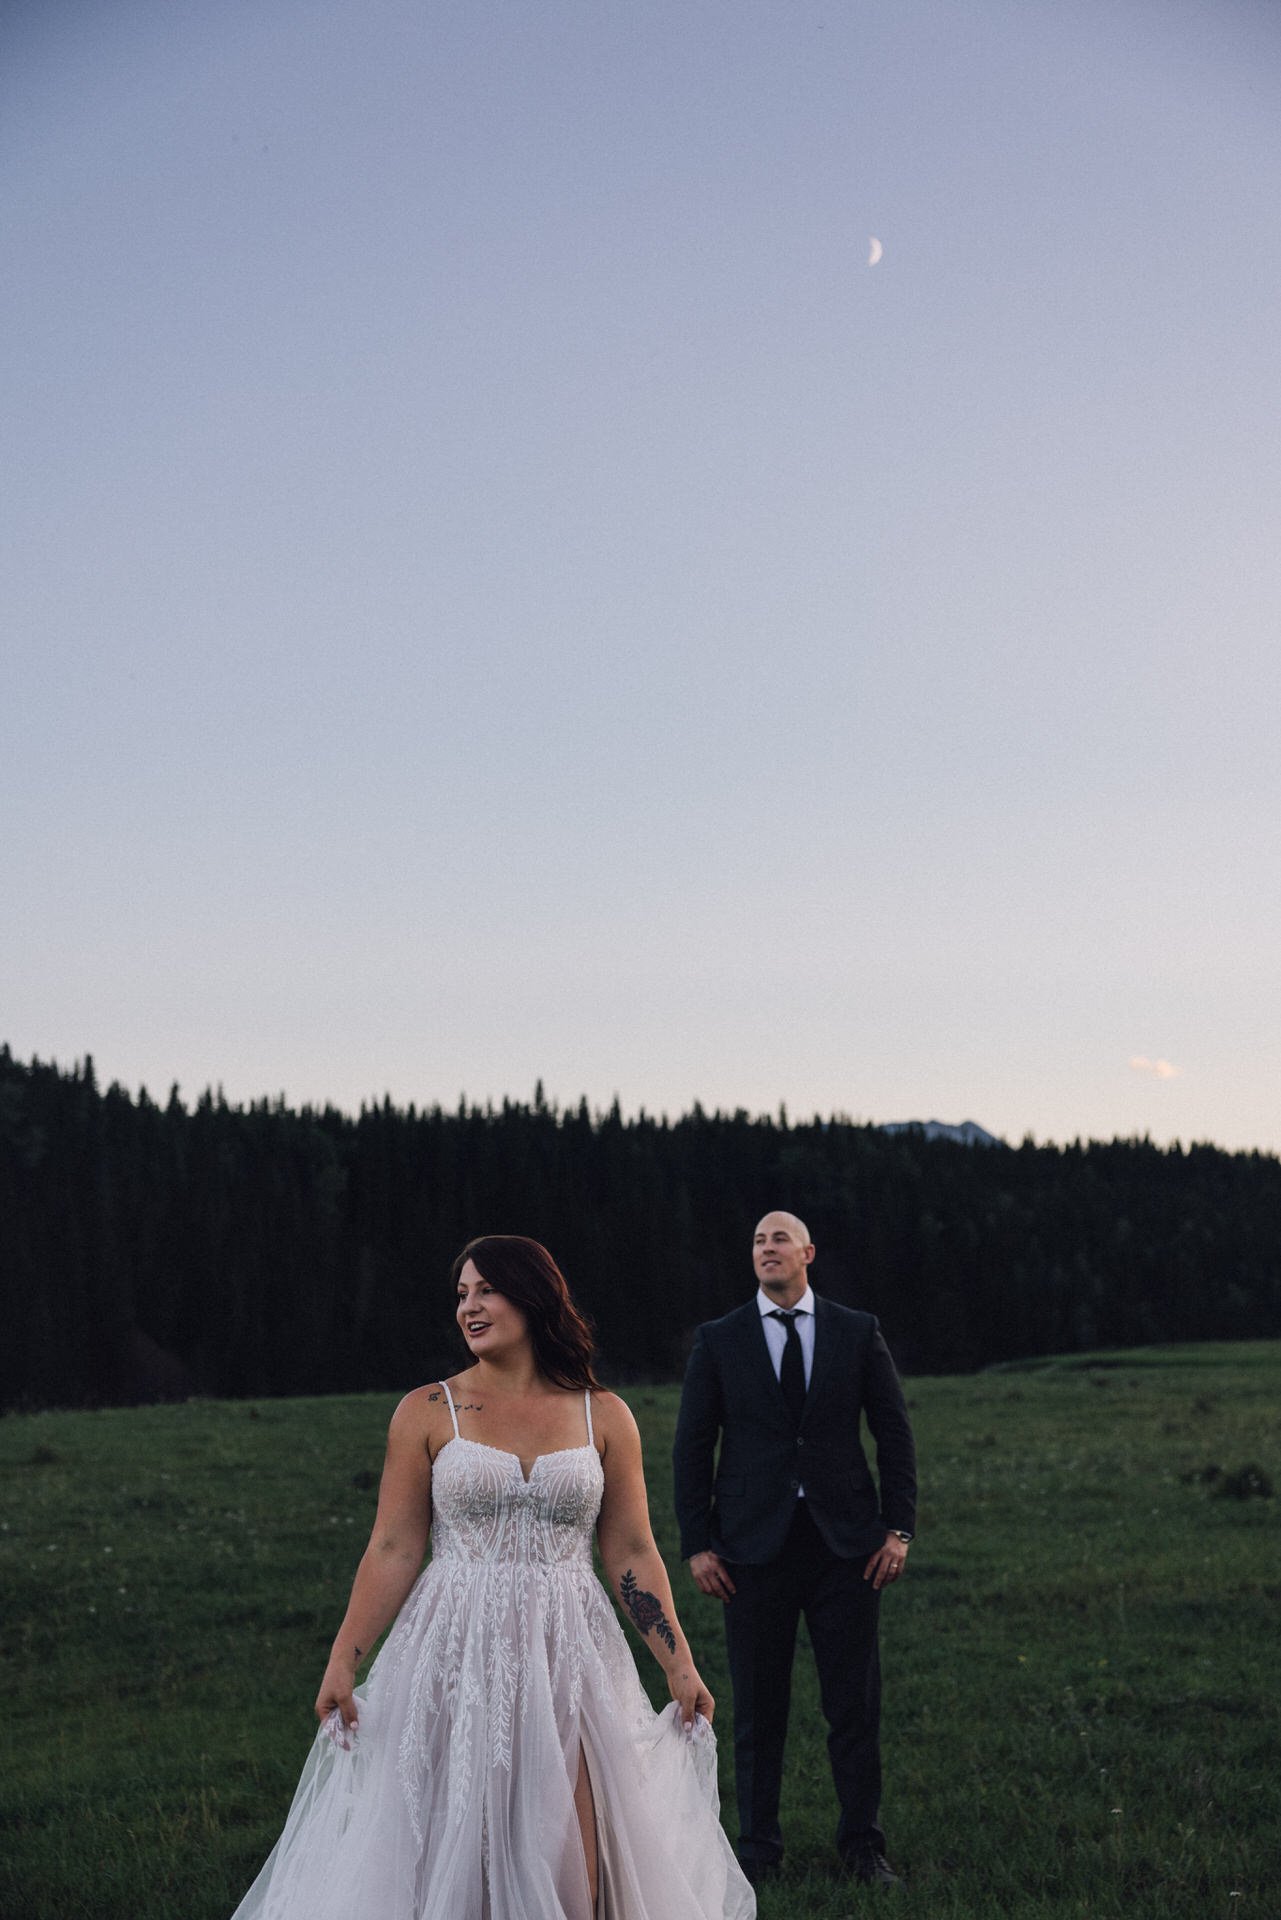 C &amp; J - Inclusive Elopement Packages Alberta - Allie Knulls Photography-122.jpgall inclusive elopement wedding packages in alberta